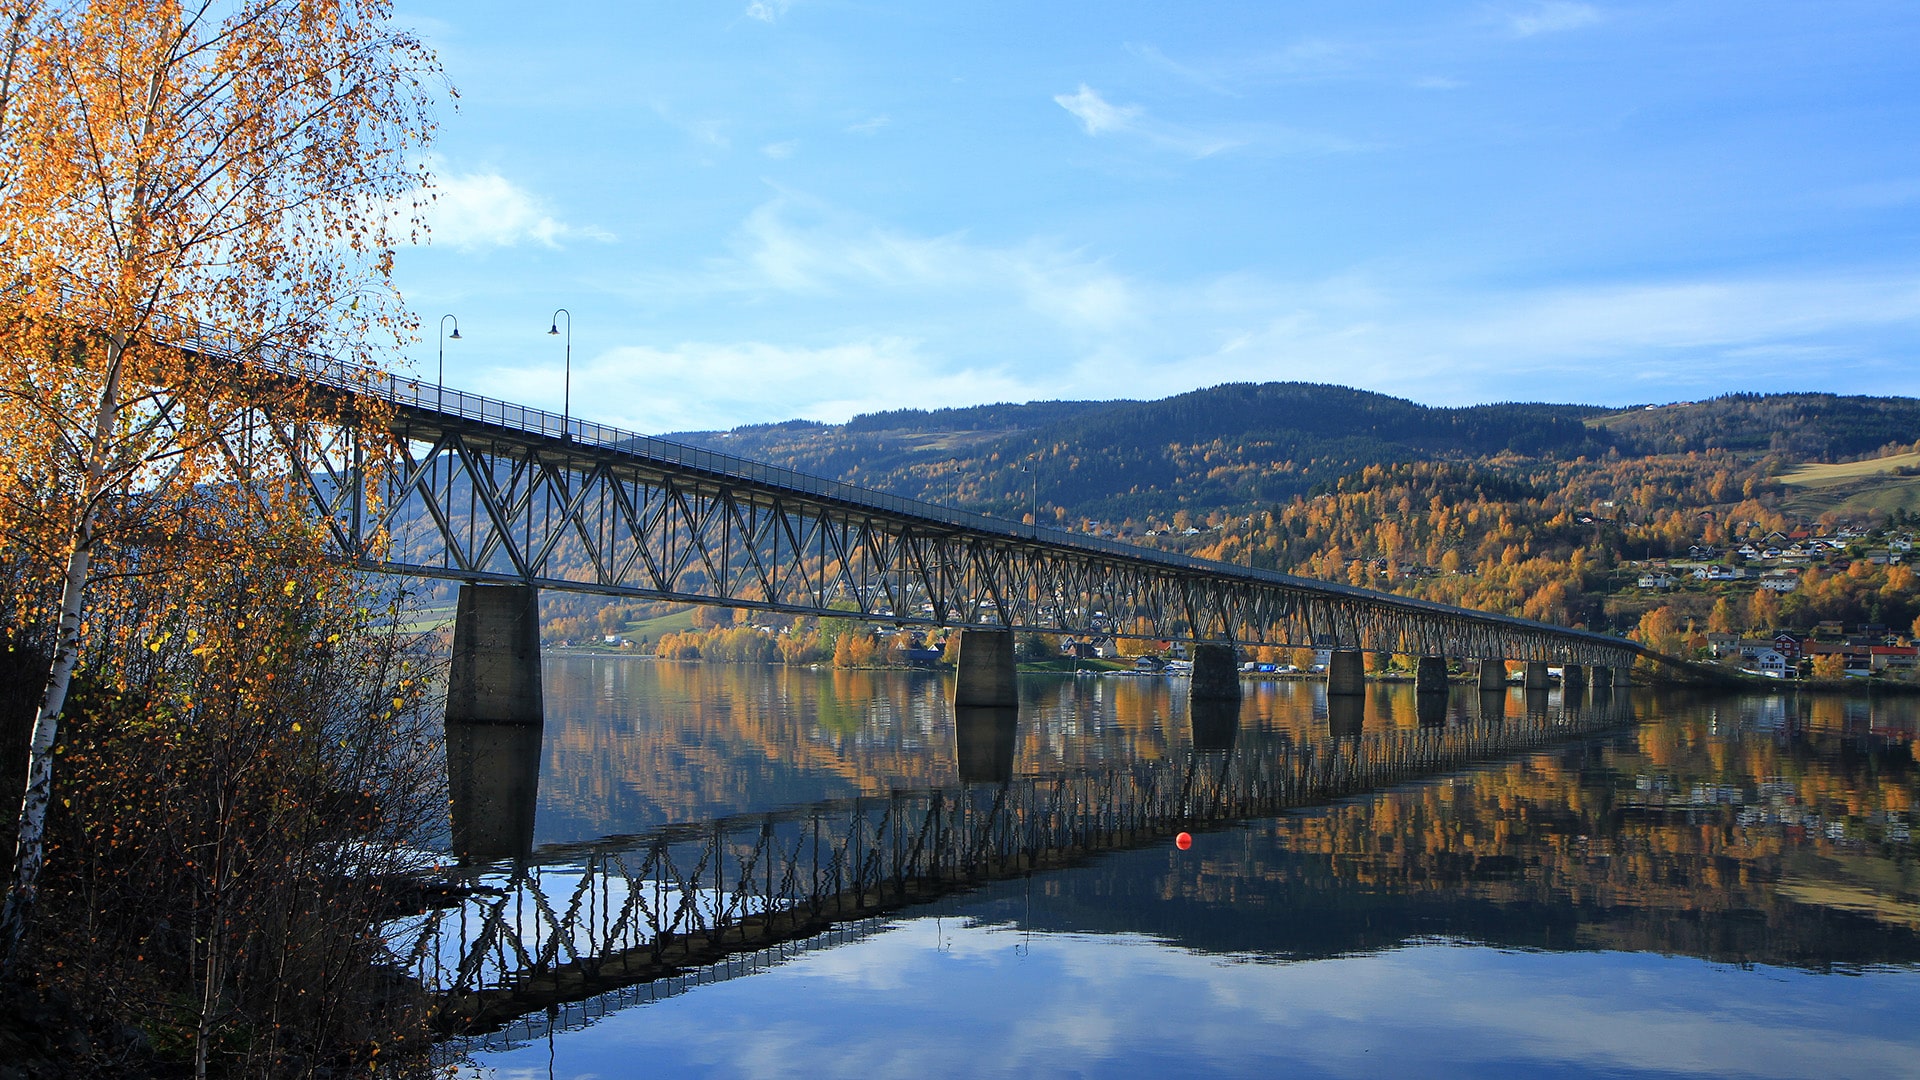 The bridge of Vingnes reflecting in lake Mjøsa on a suny autumn day.